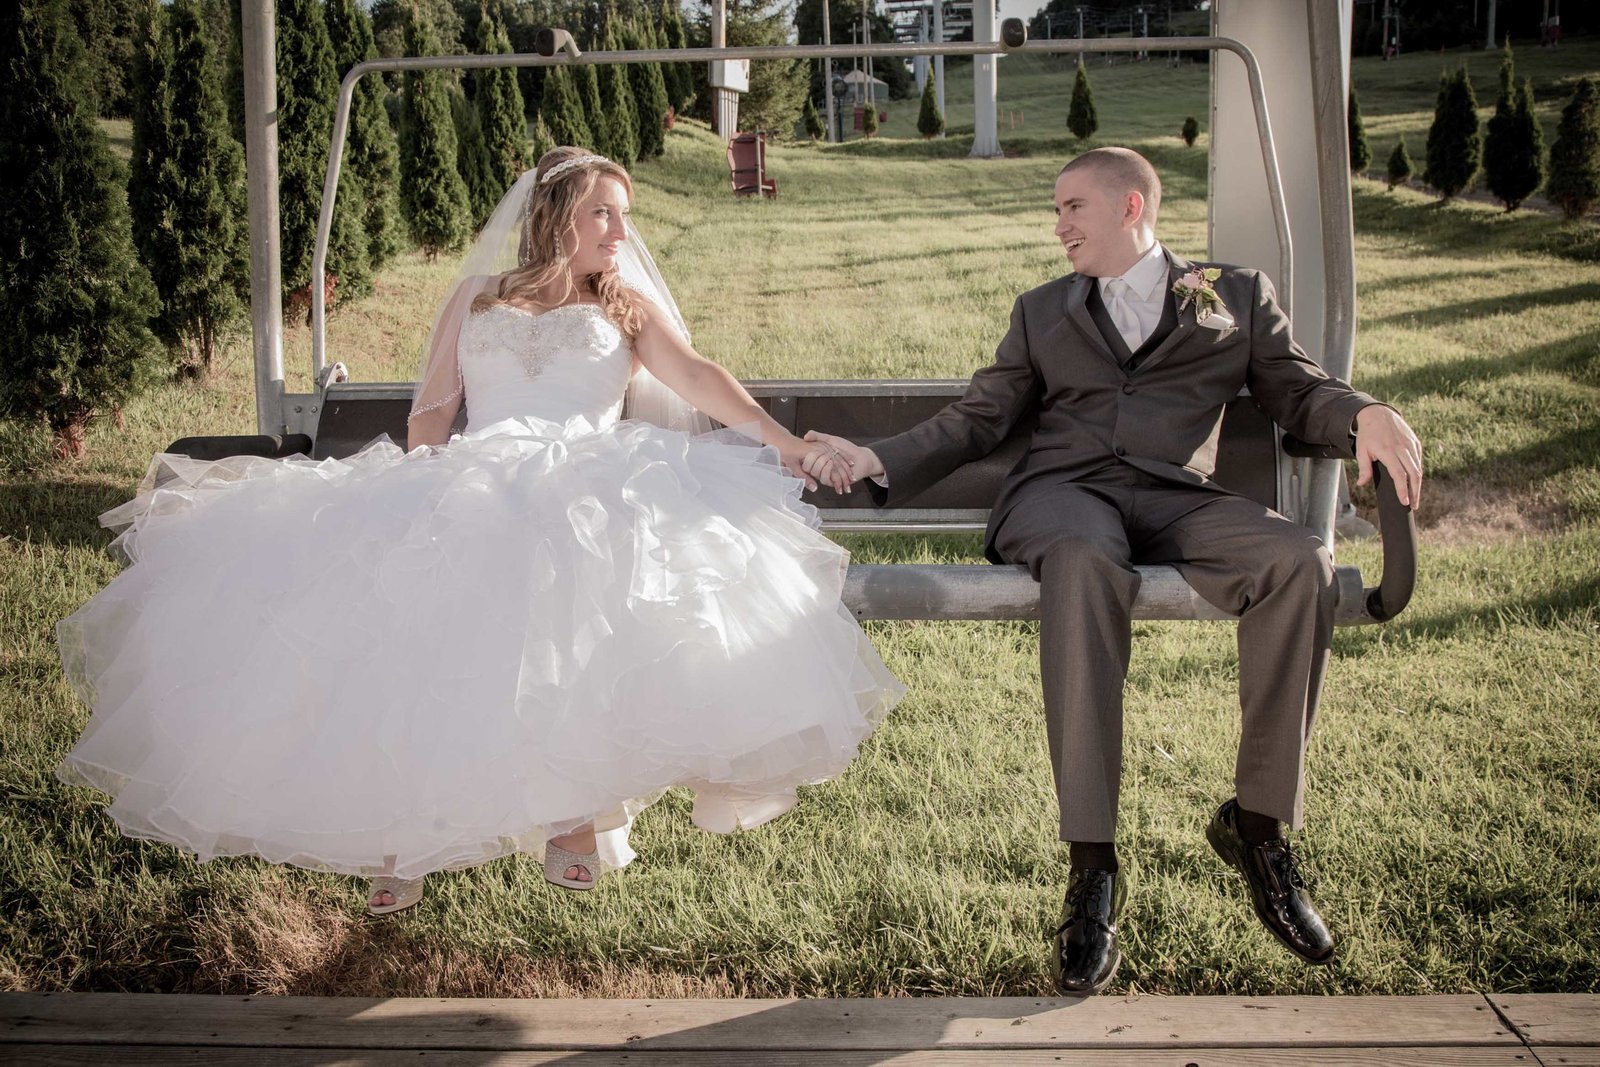 Bride and groom hold hands on ski lift in California.